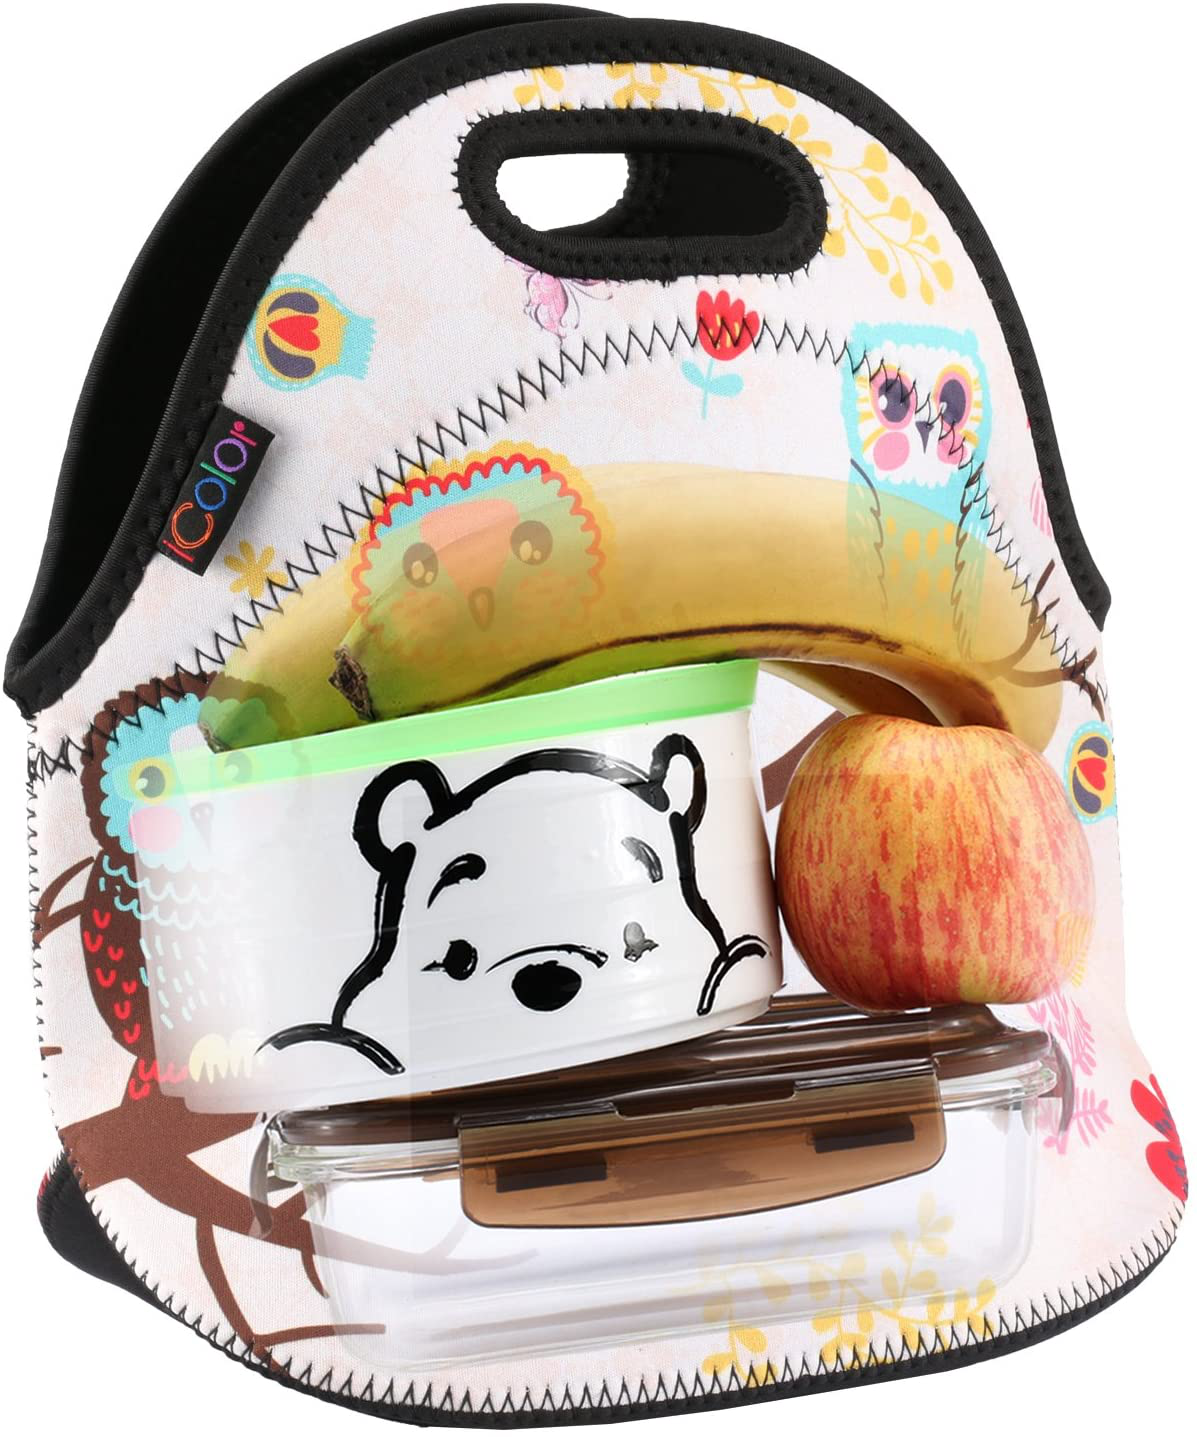 iColor Cute Cheetah Insulated Lunch Tote Bag Cooler Box Neoprene lunchbox Carrying baby bag School/Office Handbag Soft Case HOT